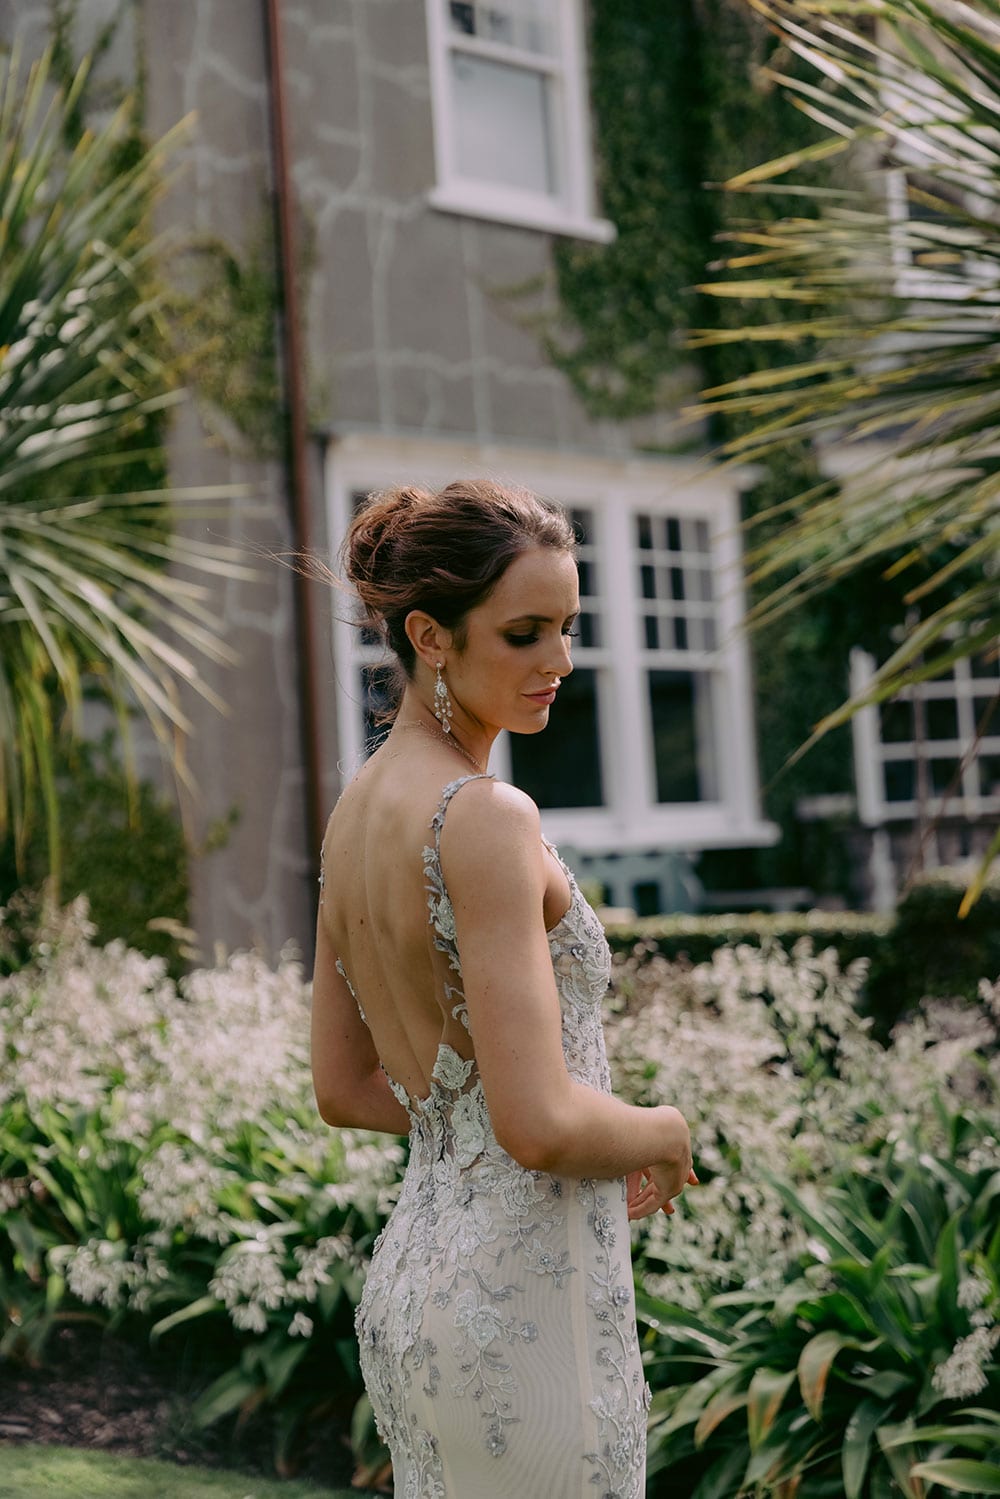 Kazumi Wedding gown from Vinka Design - Flattering and form fitting wedding dress in soft grey shades on a blush base. Low sheer back is adorned with hand-appliqued lace, bodice has a deep V-neckline, & thin straps that compliment the shoulders. Model wearing gown walking through Clevedon gardens showing detail of low back of dress.